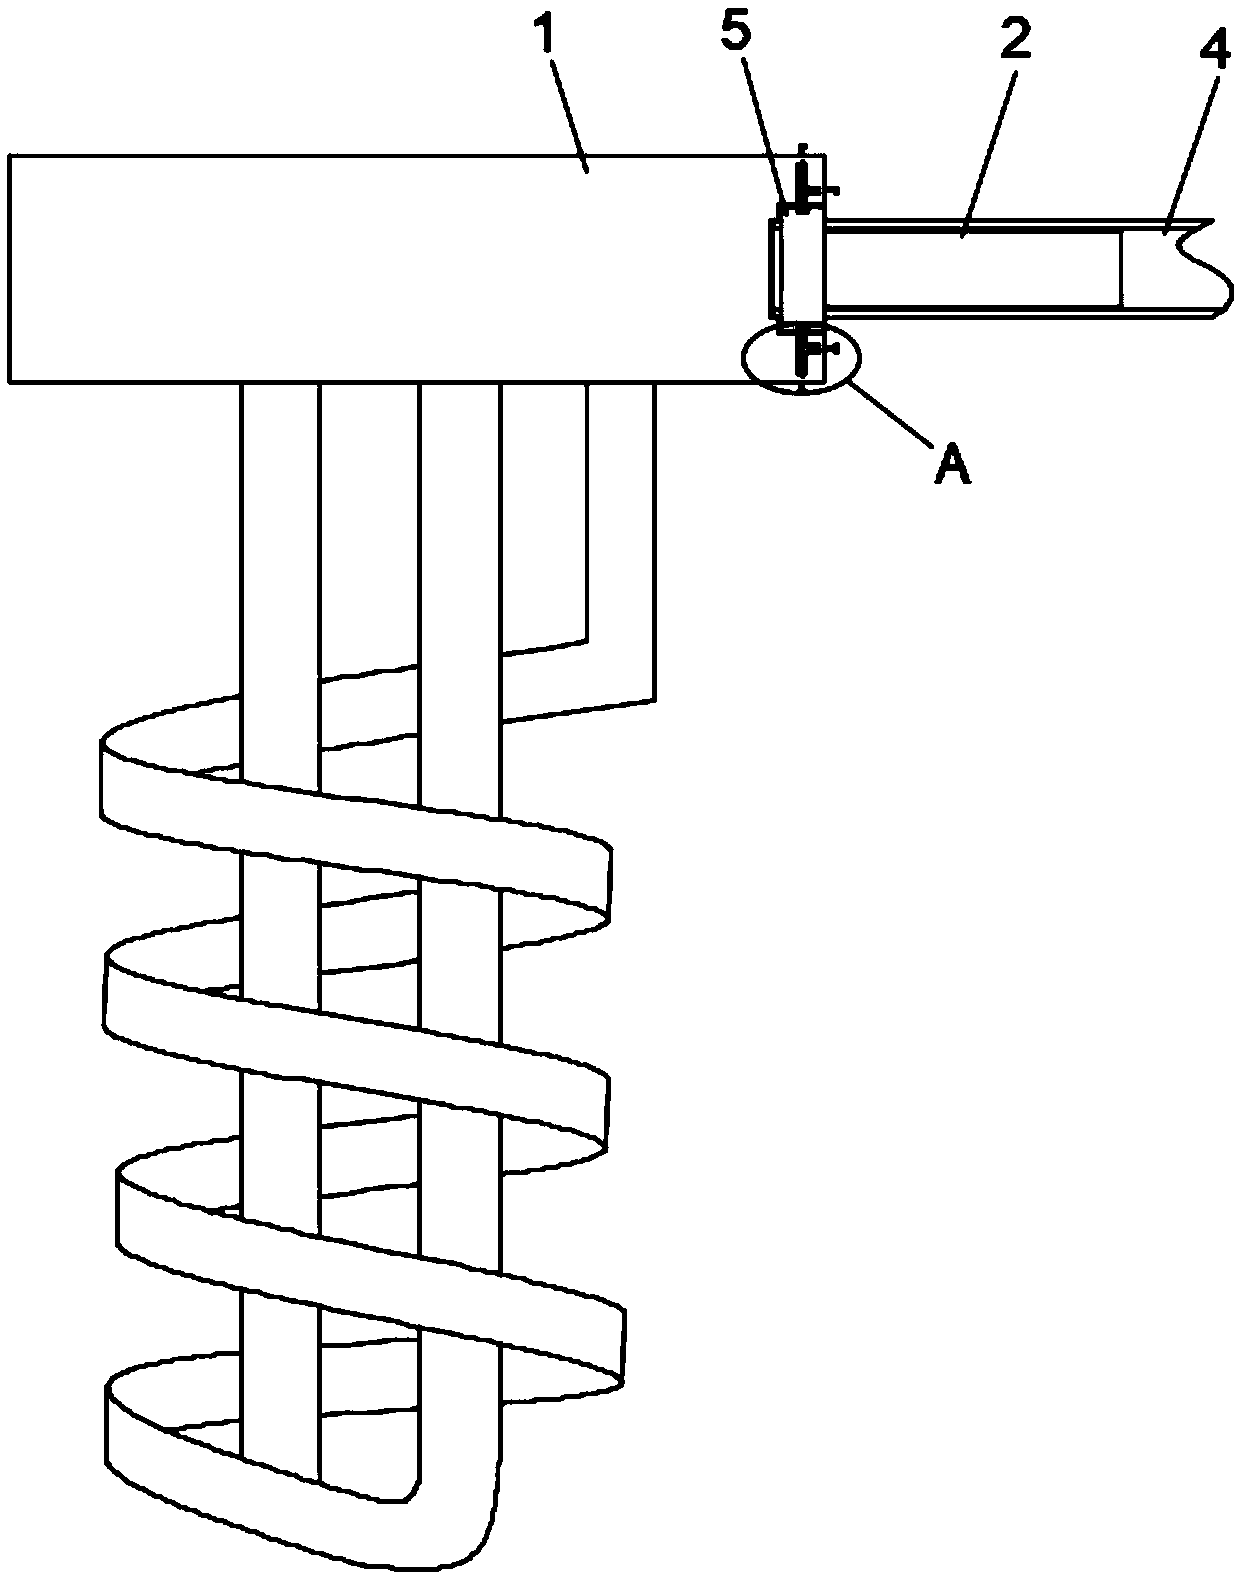 Connection structure of urea liquid level sensor and joint for vehicle